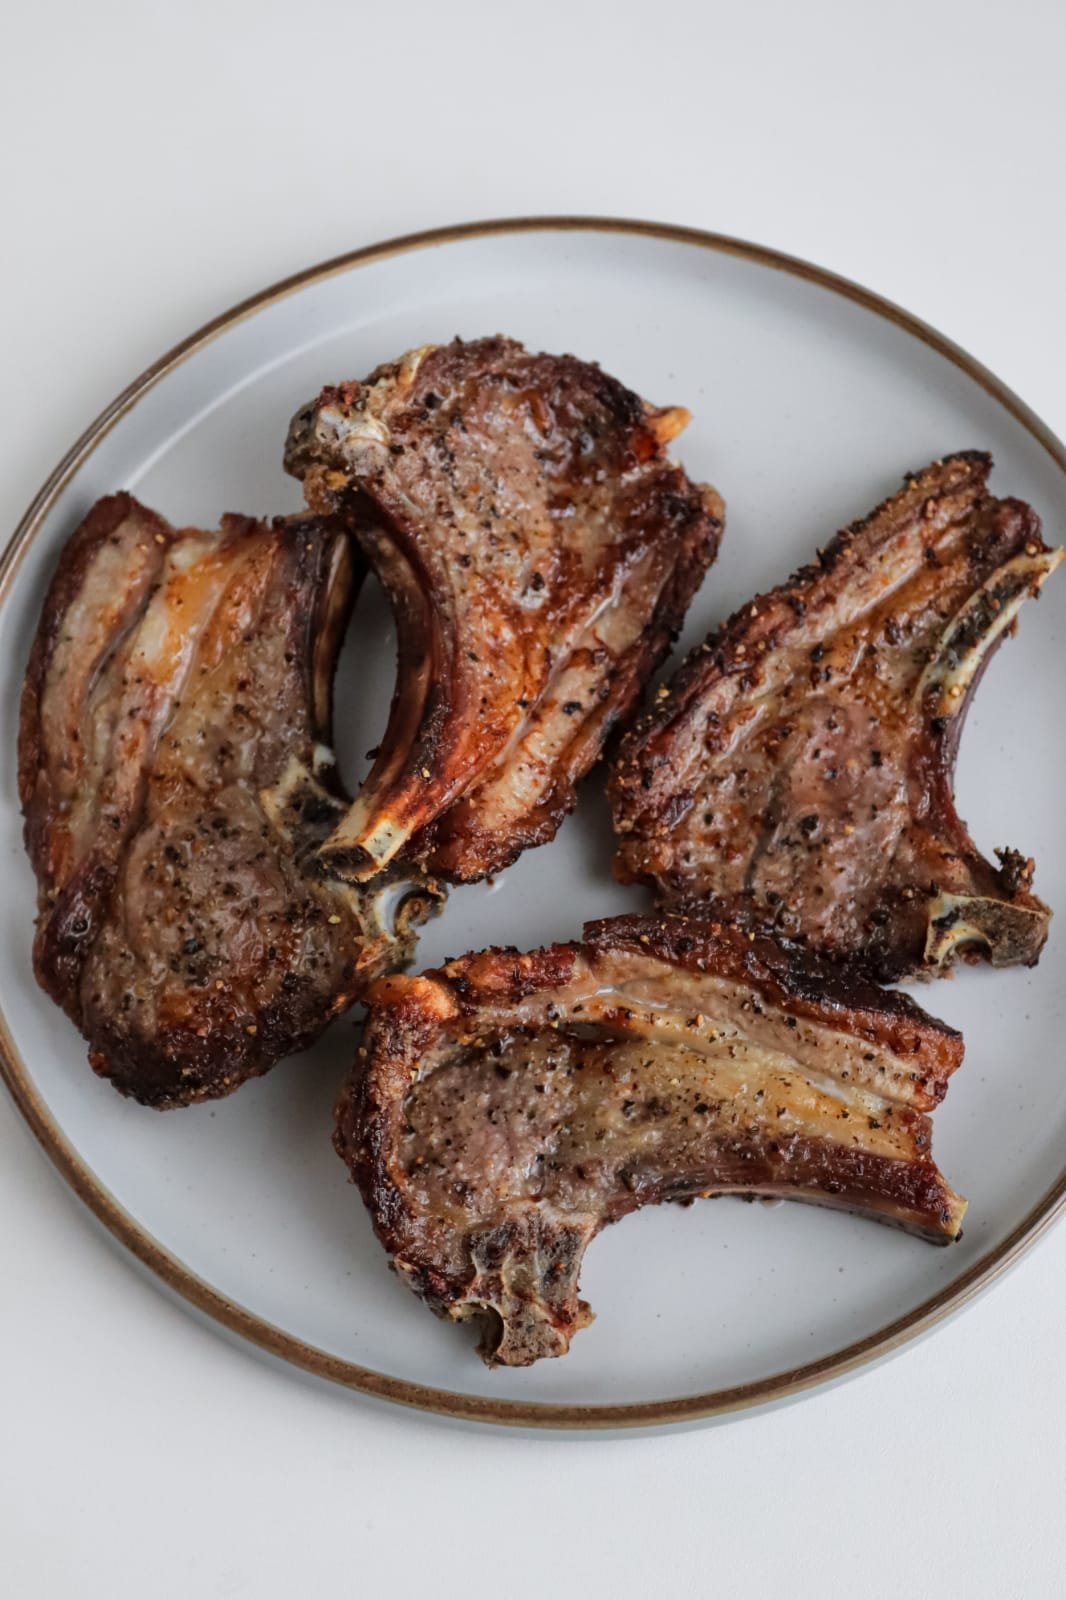 Lamb Chops cooked to perfection